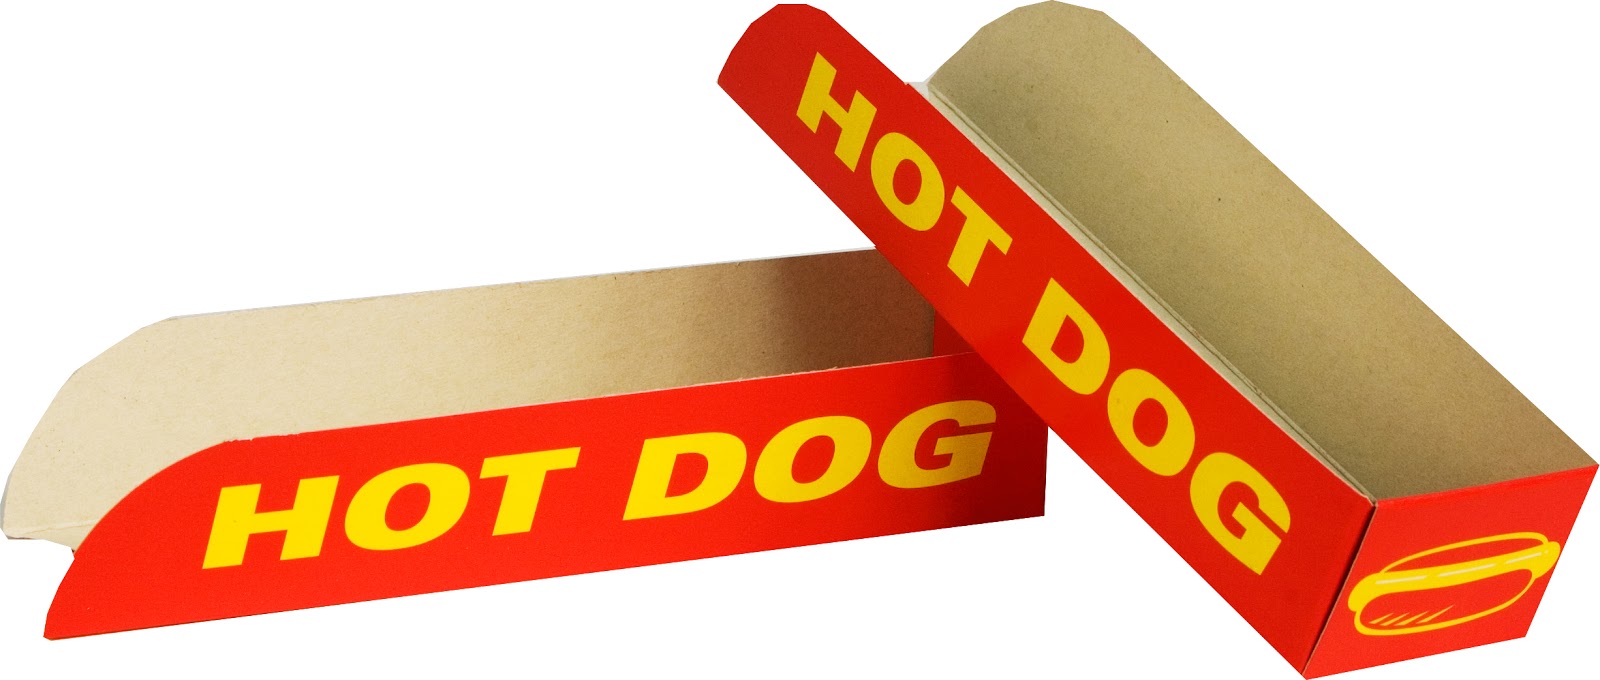 Stand Out at Events Custom Hot Dog Boxes